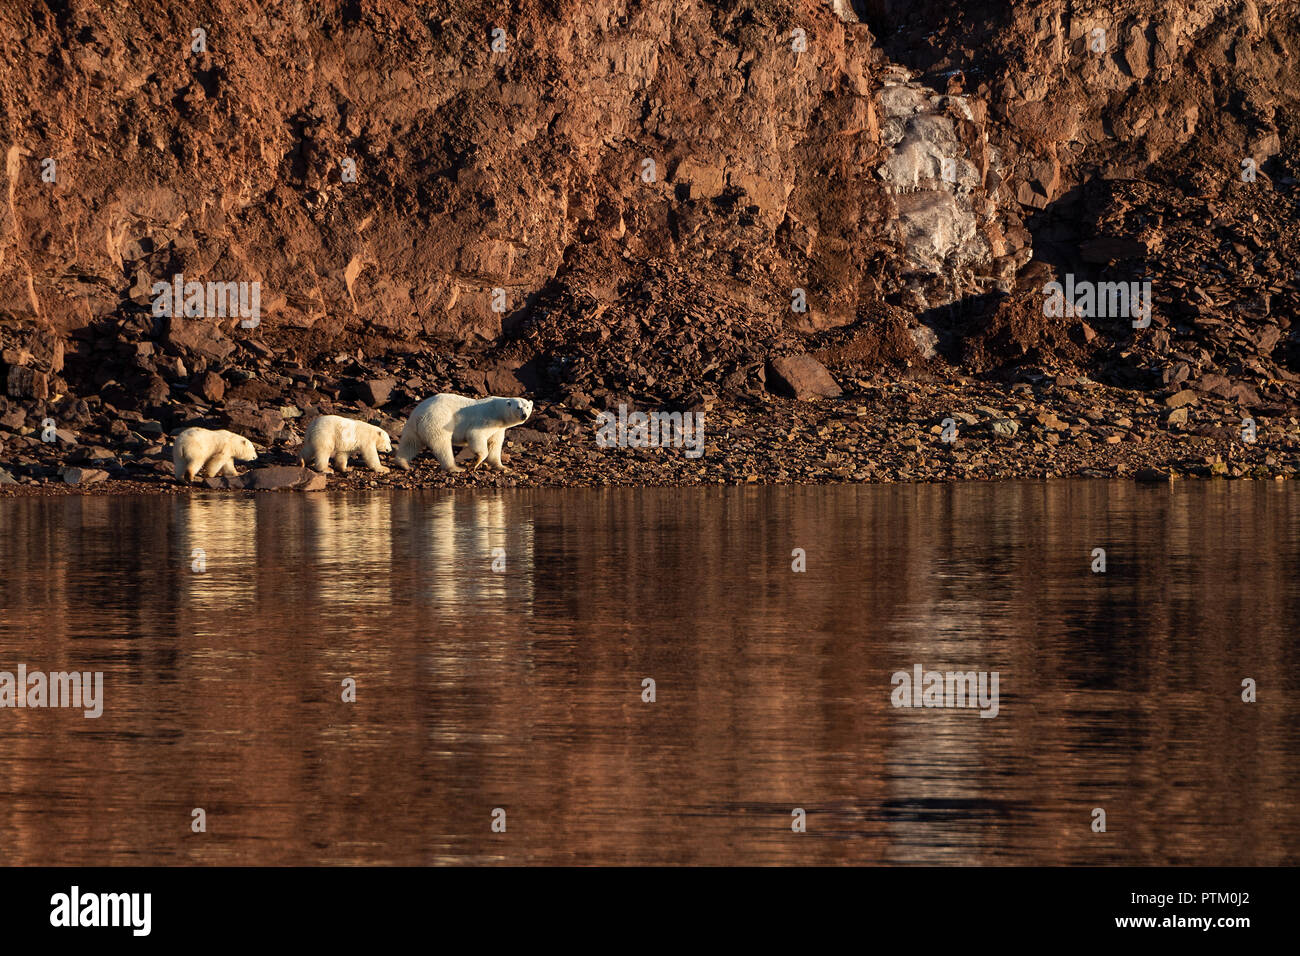 Polar bears (Ursus maritimus), mother animal with two cubs running on rocky shores, Woodfjords, Spitsbergen Island Stock Photo